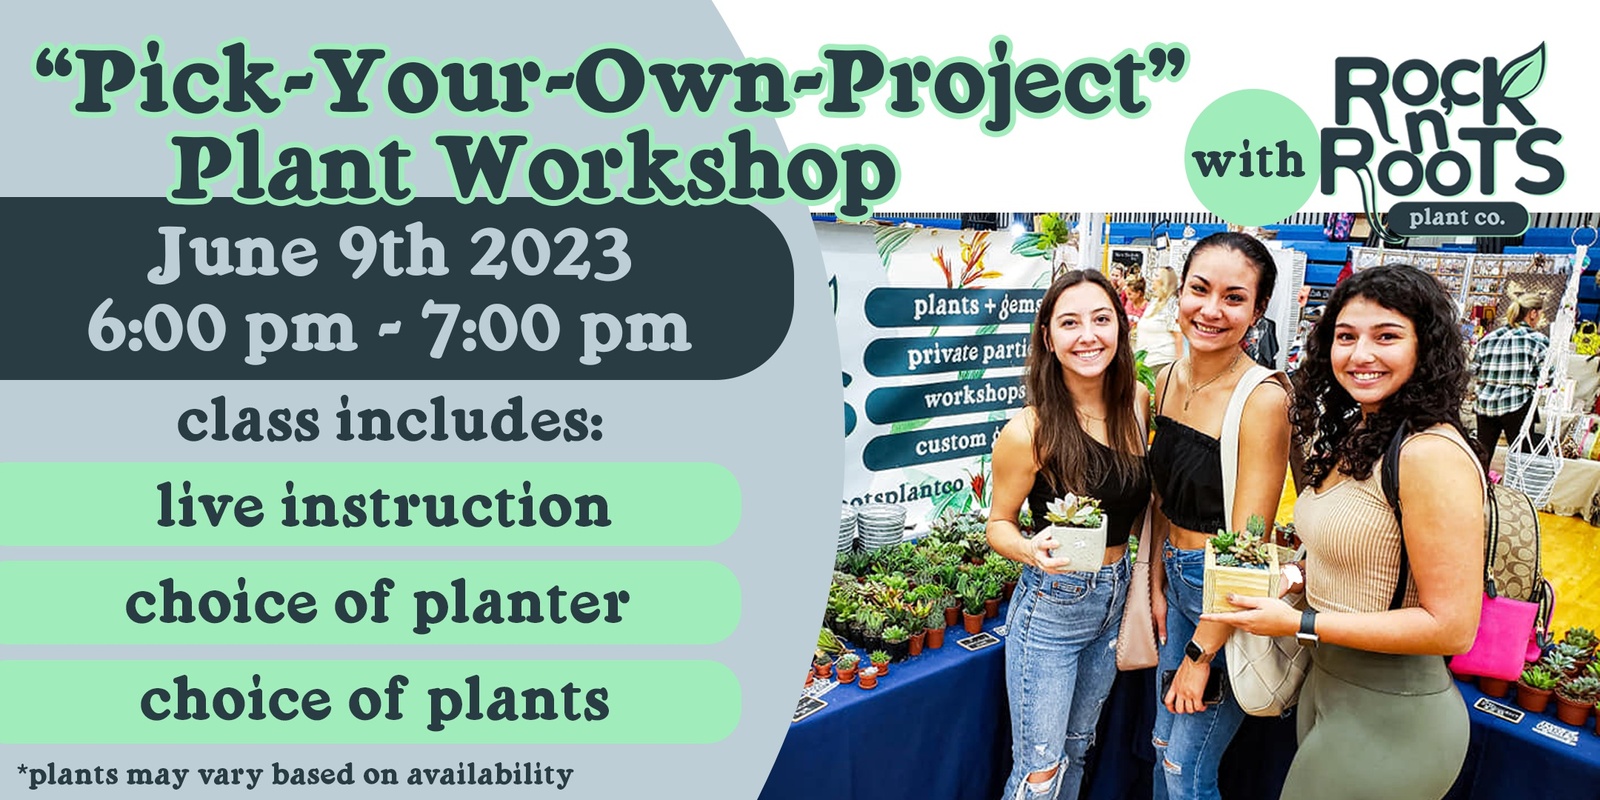 Banner image for PICK-YOUR-OWN-PROJECT Workshop at Rock n' Roots Plant Co. (Pawleys Island, SC)